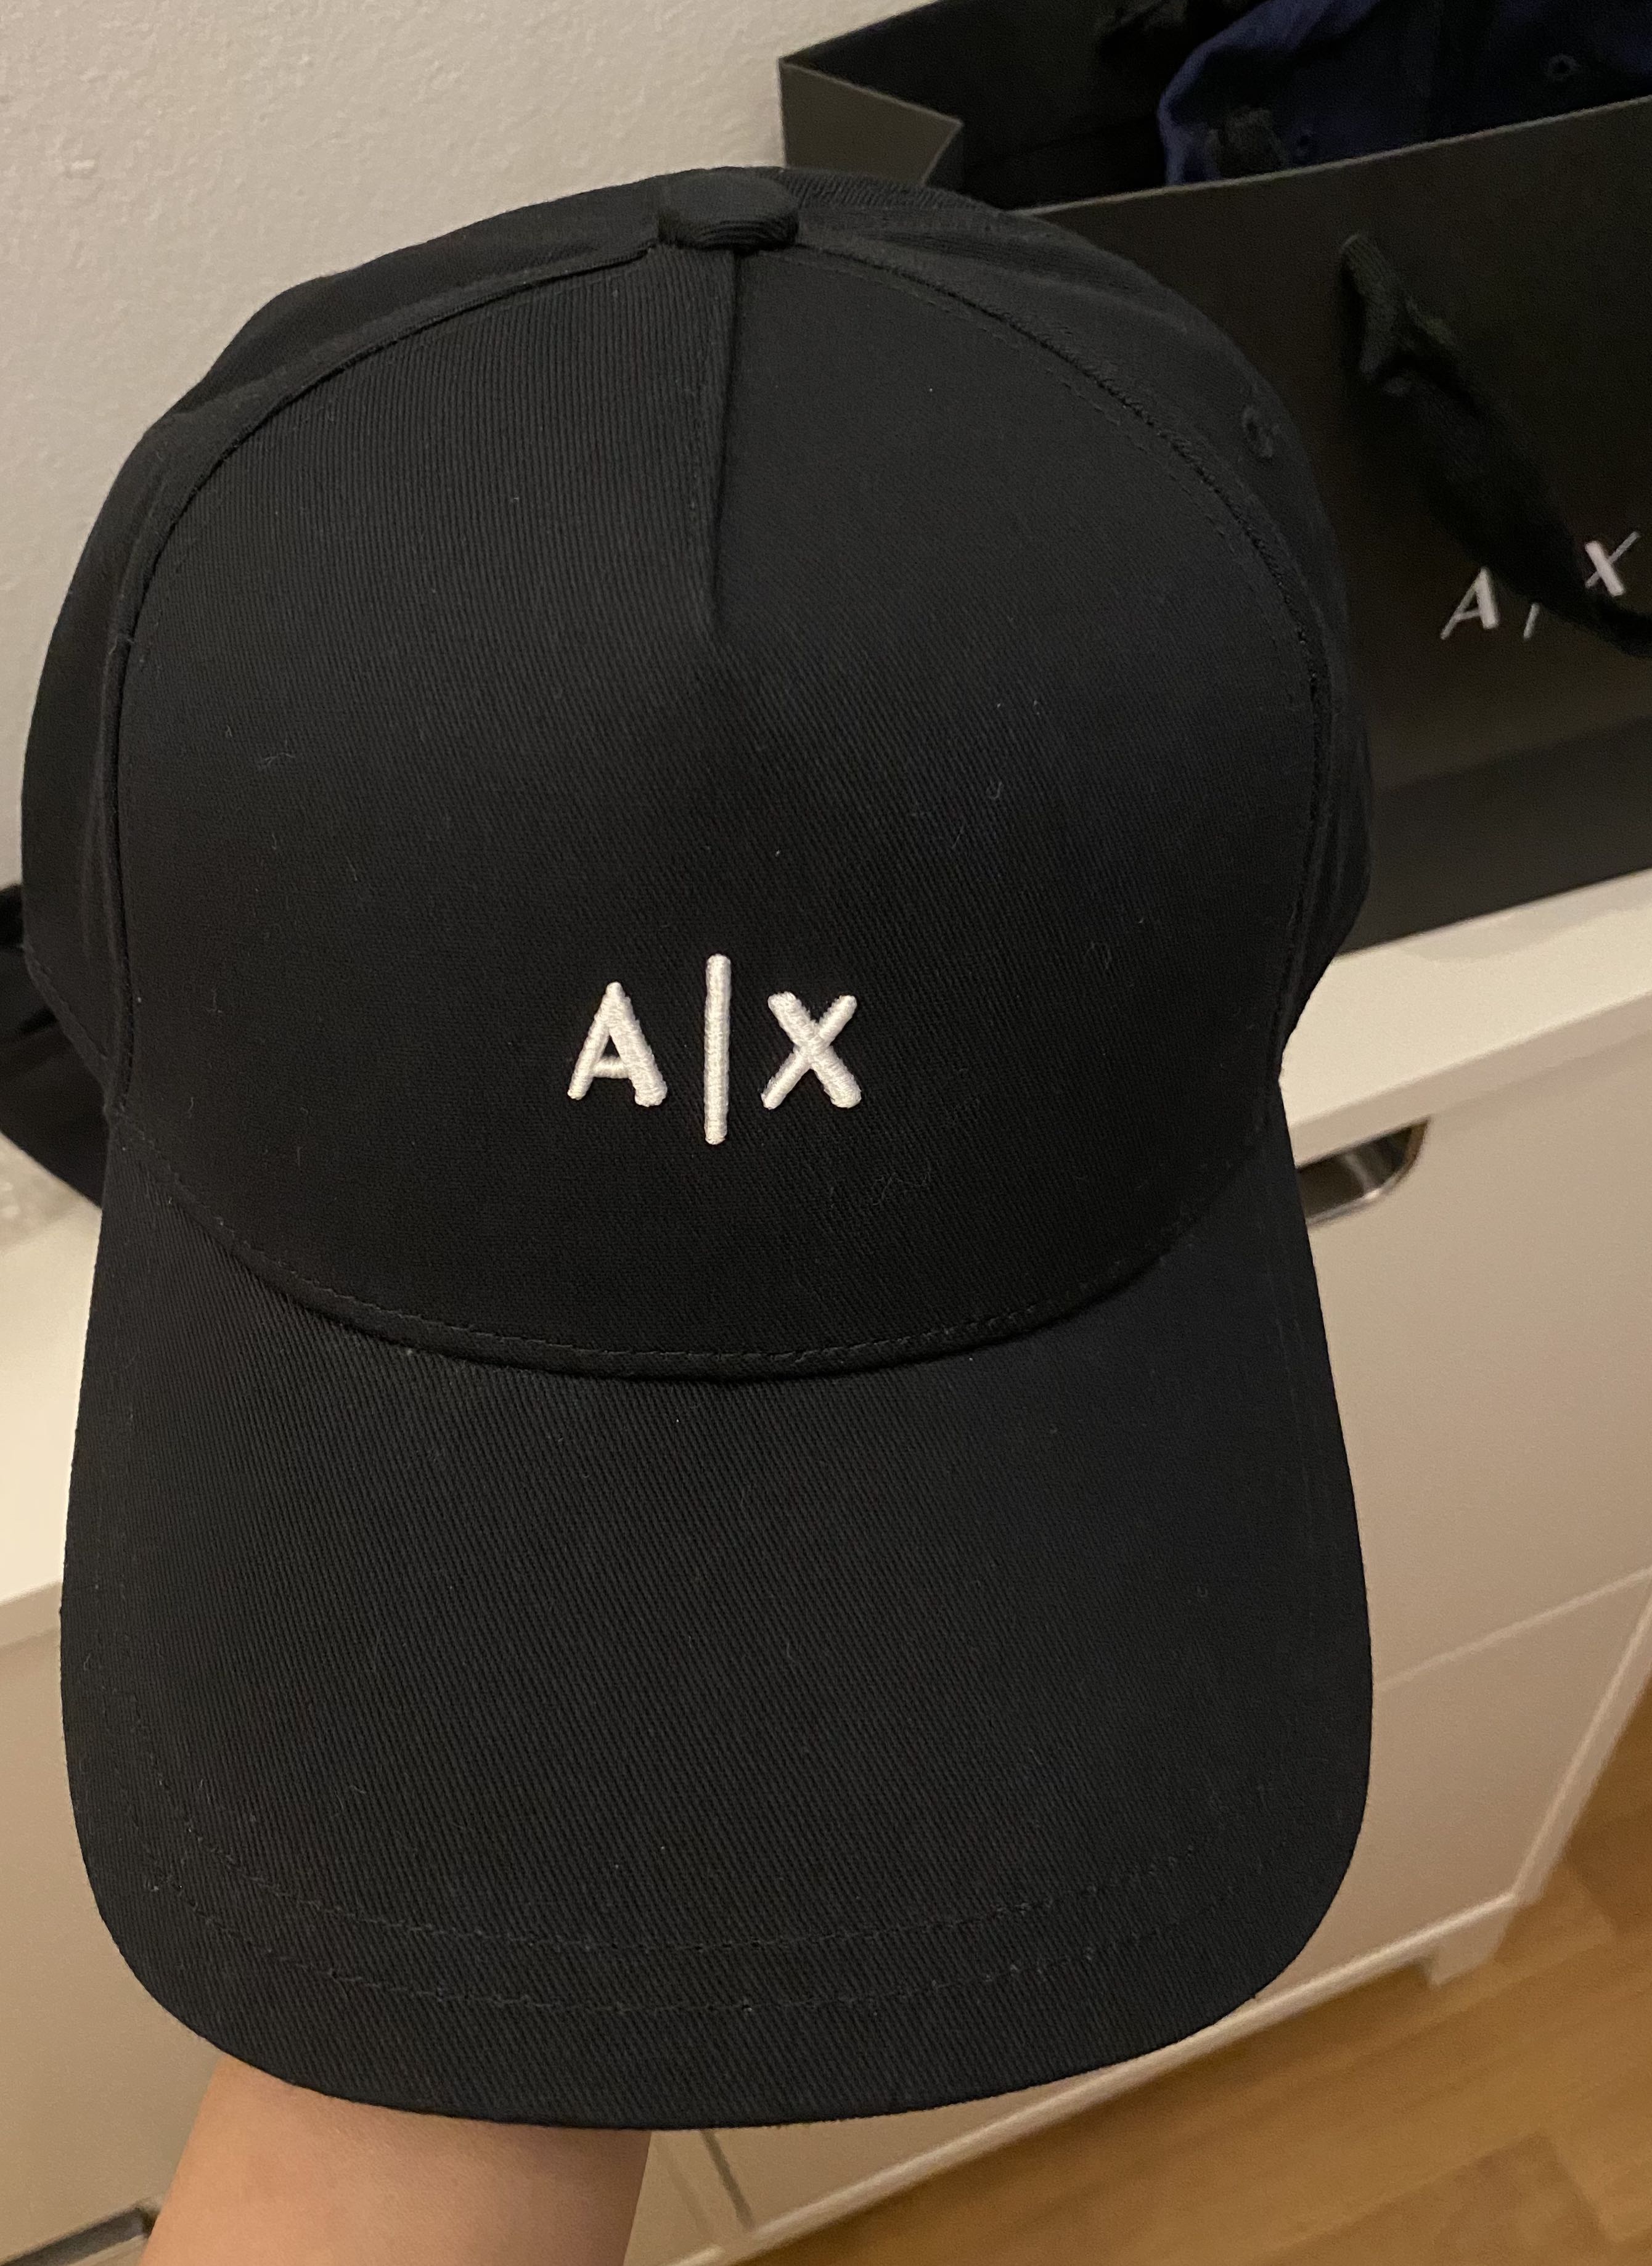 Armani Exchange Cap in Black colour, Men's Fashion, Watches & Accessories,  Cap & Hats on Carousell